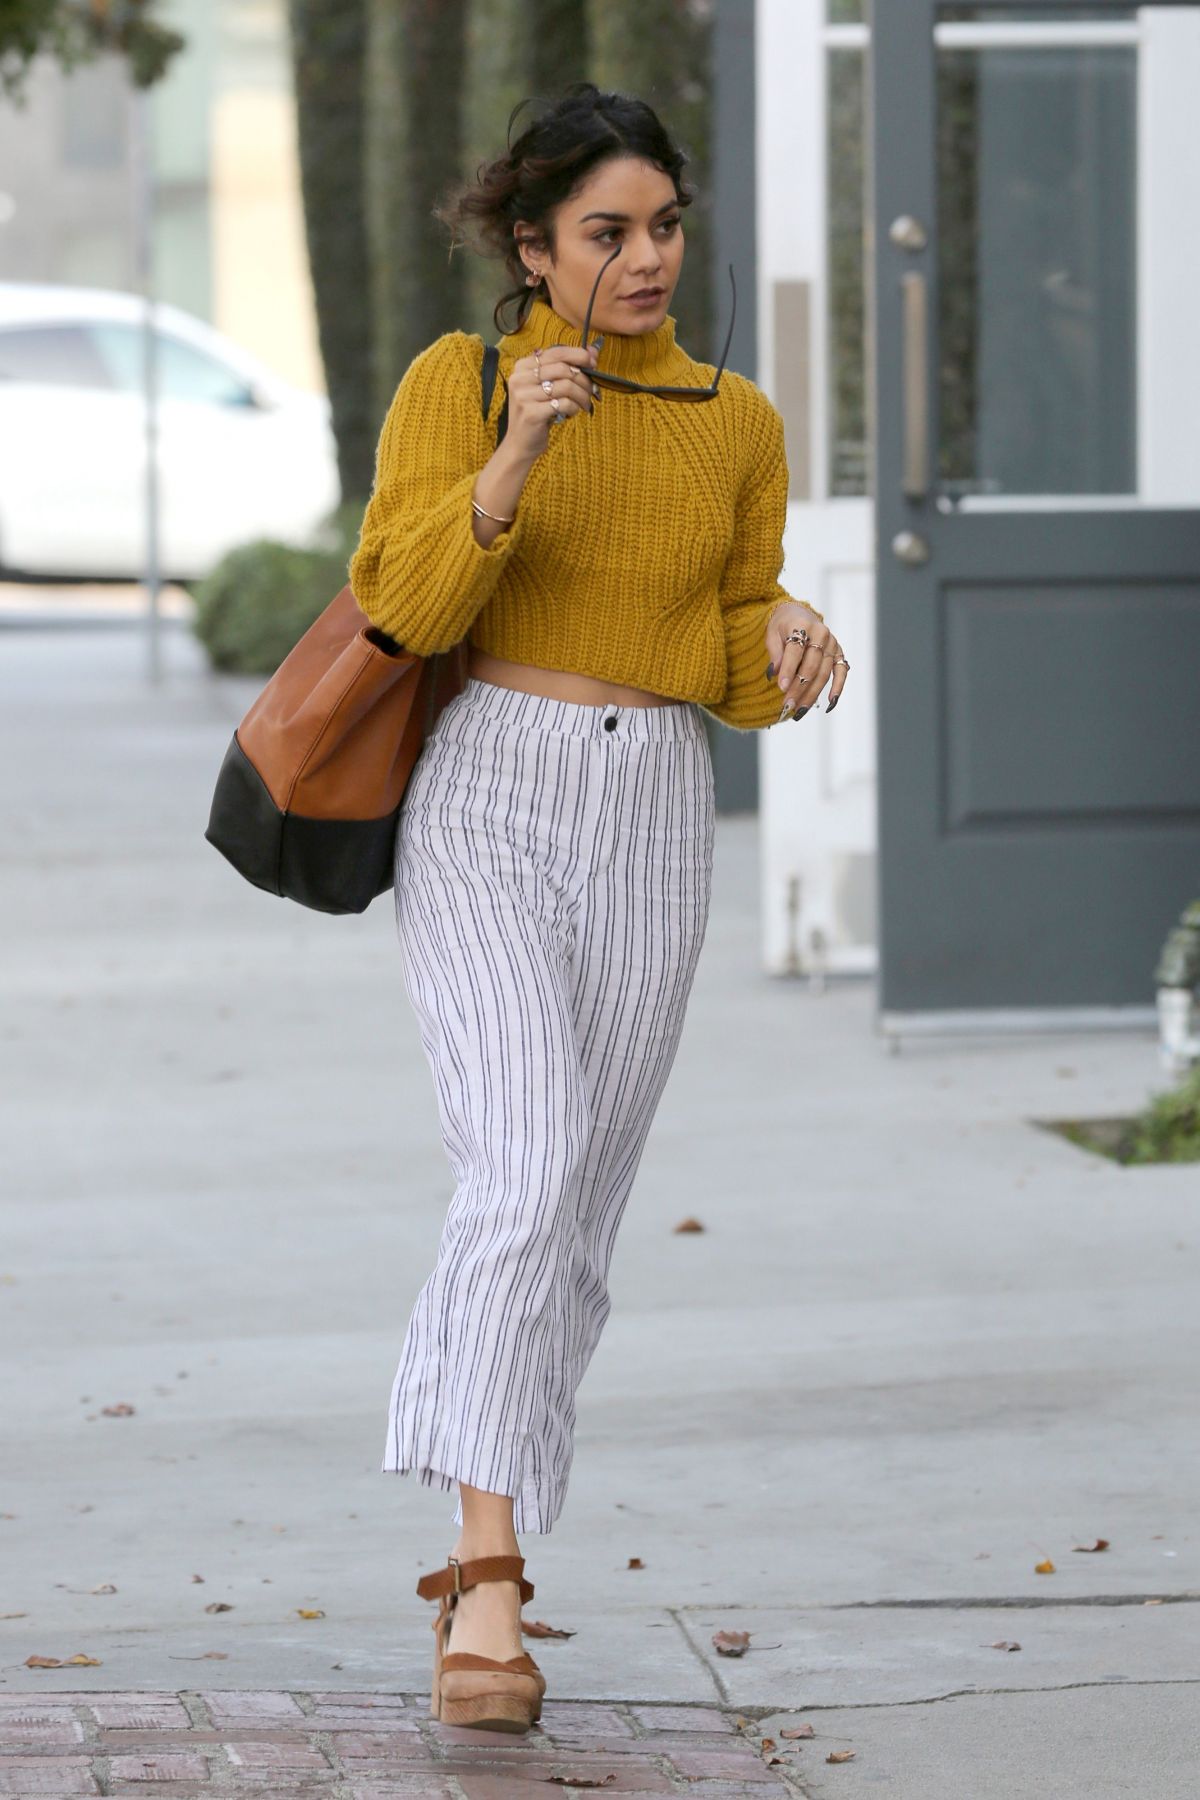 vanessa-hudgens-out-shopping-in-west-hollywood-11-16-2016_9.jpg